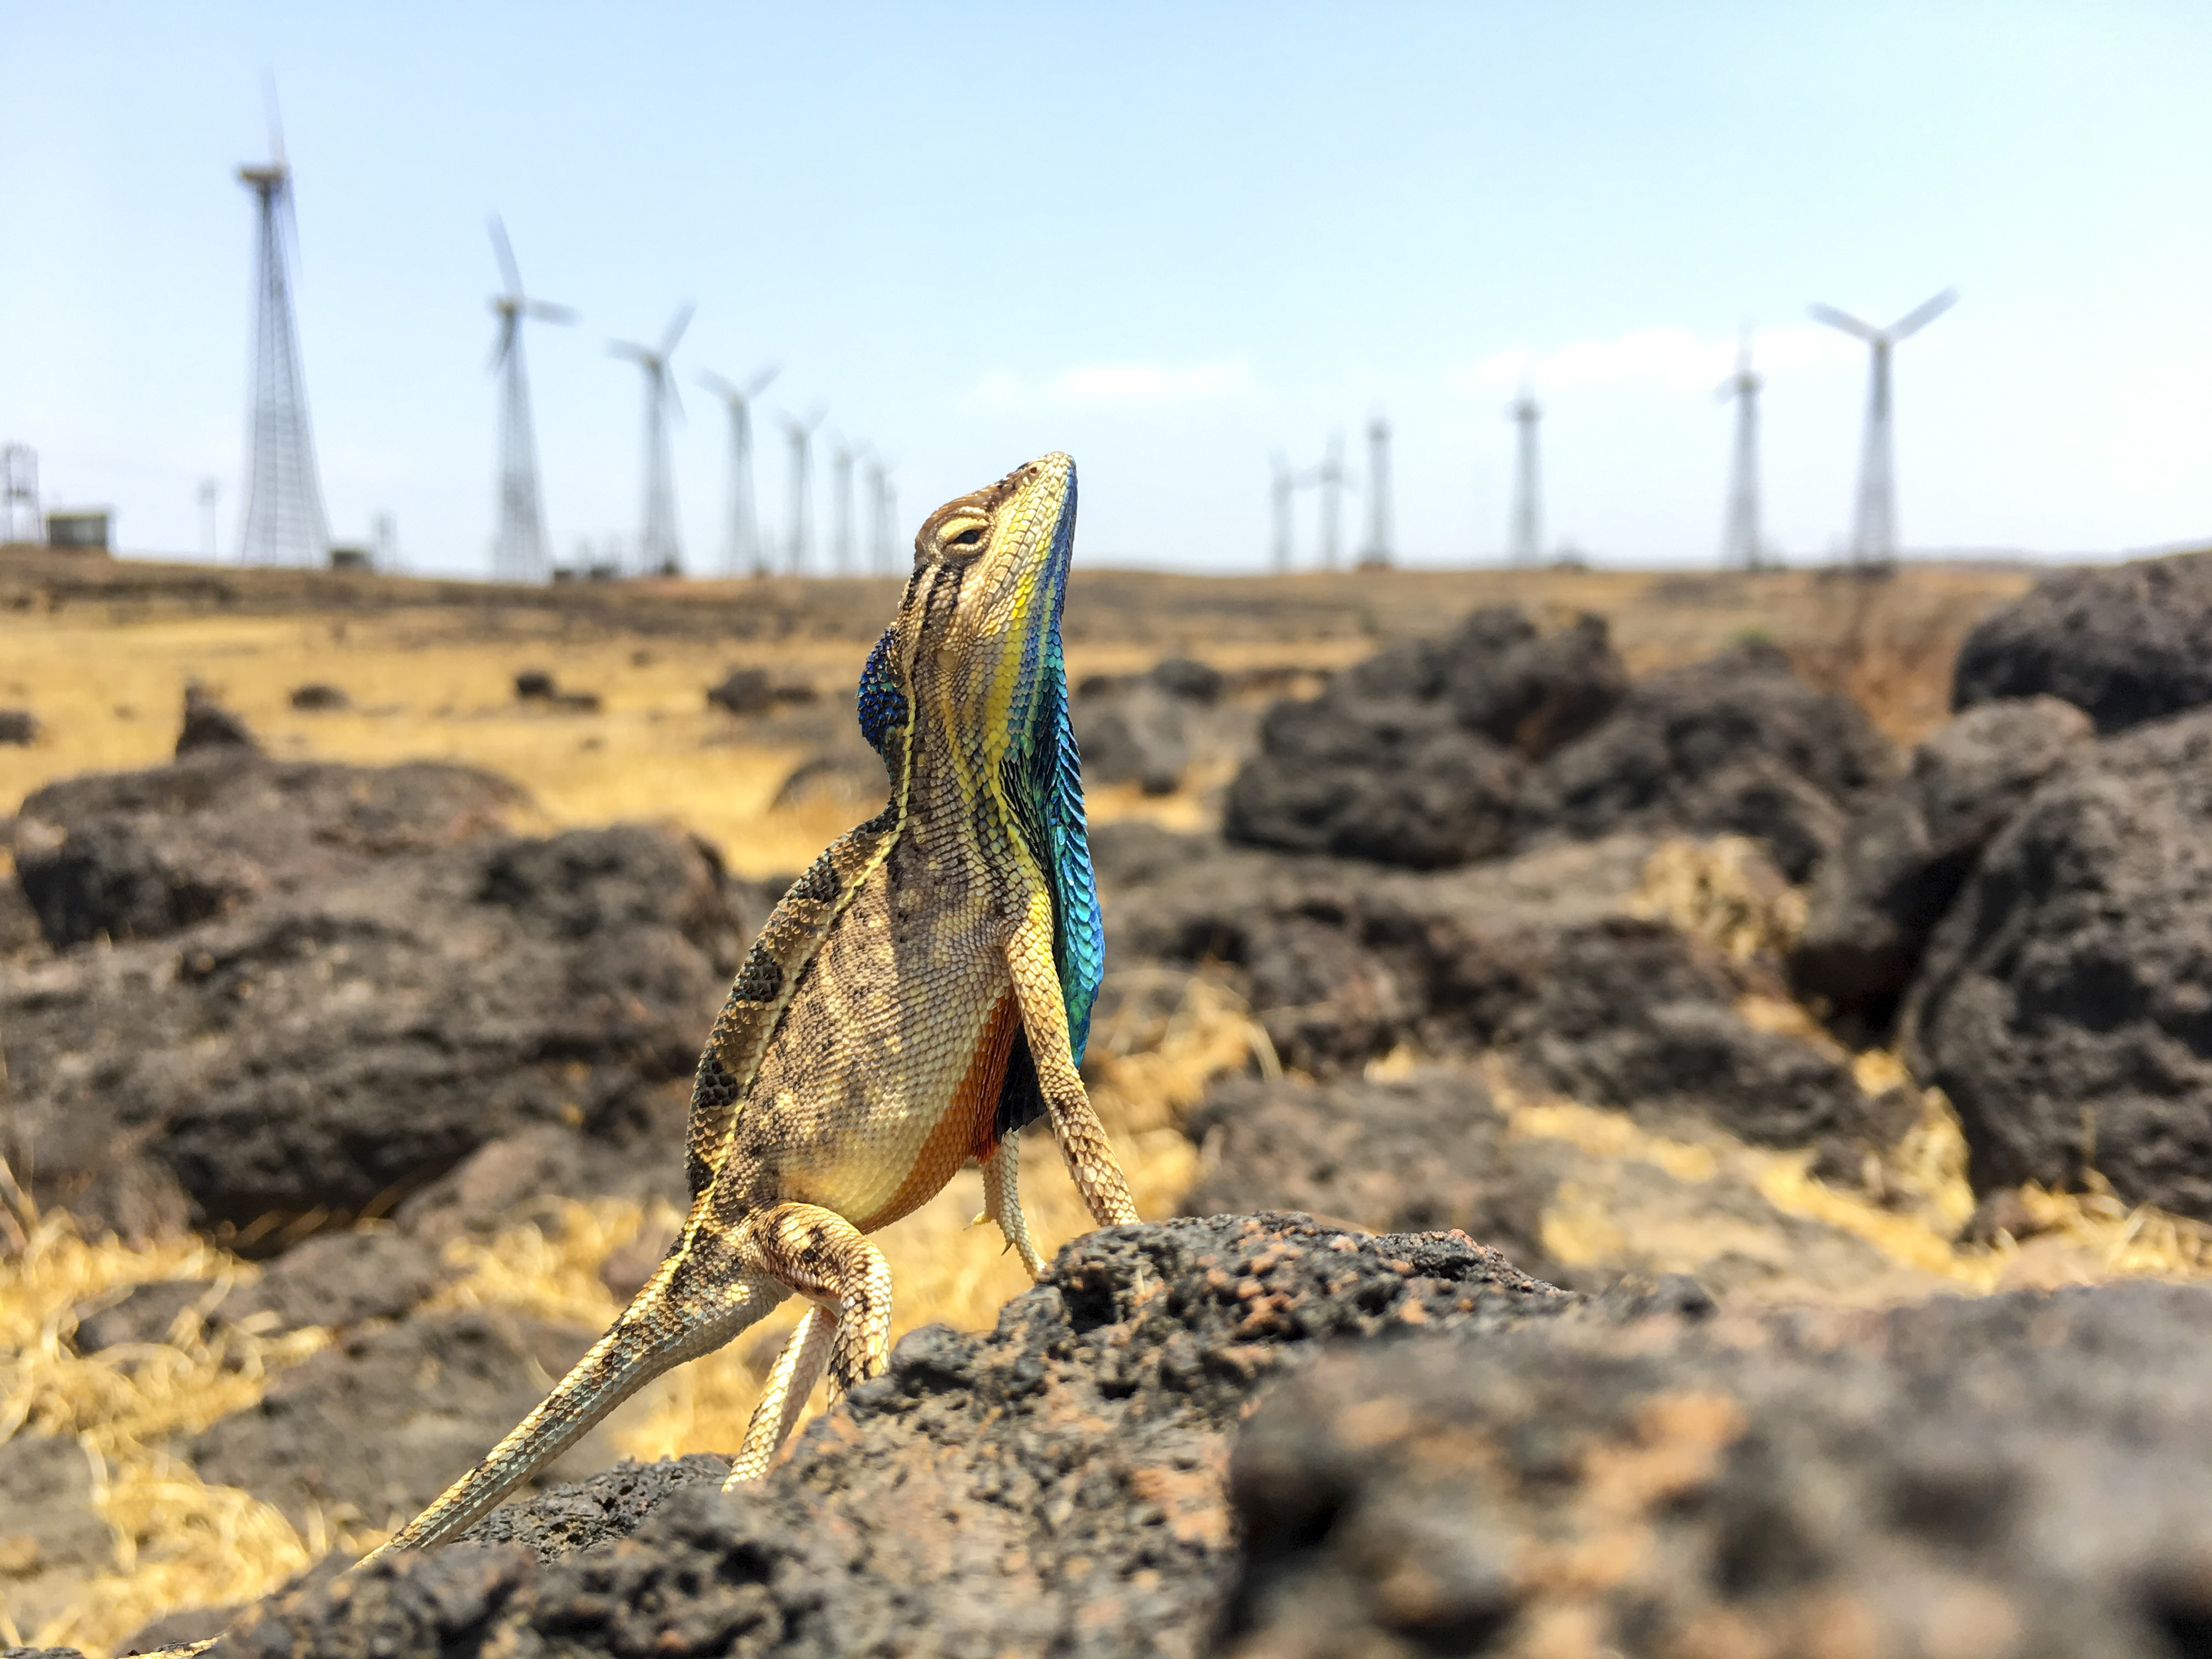 Lizards and Windmills // A vibrant Fan-throated Lizard (Sarada superba) stands guard over his territory. This lizard was photographed in the Chalkewadi plateau in Satara district, which is the site of one of the largest wind farms in this region. Researchers believe that that windmills may affect predator behavior giving a chance for these tiny lizards to thrive in this rocky plateau. © Sandesh Kadur/TNC Photo Contest